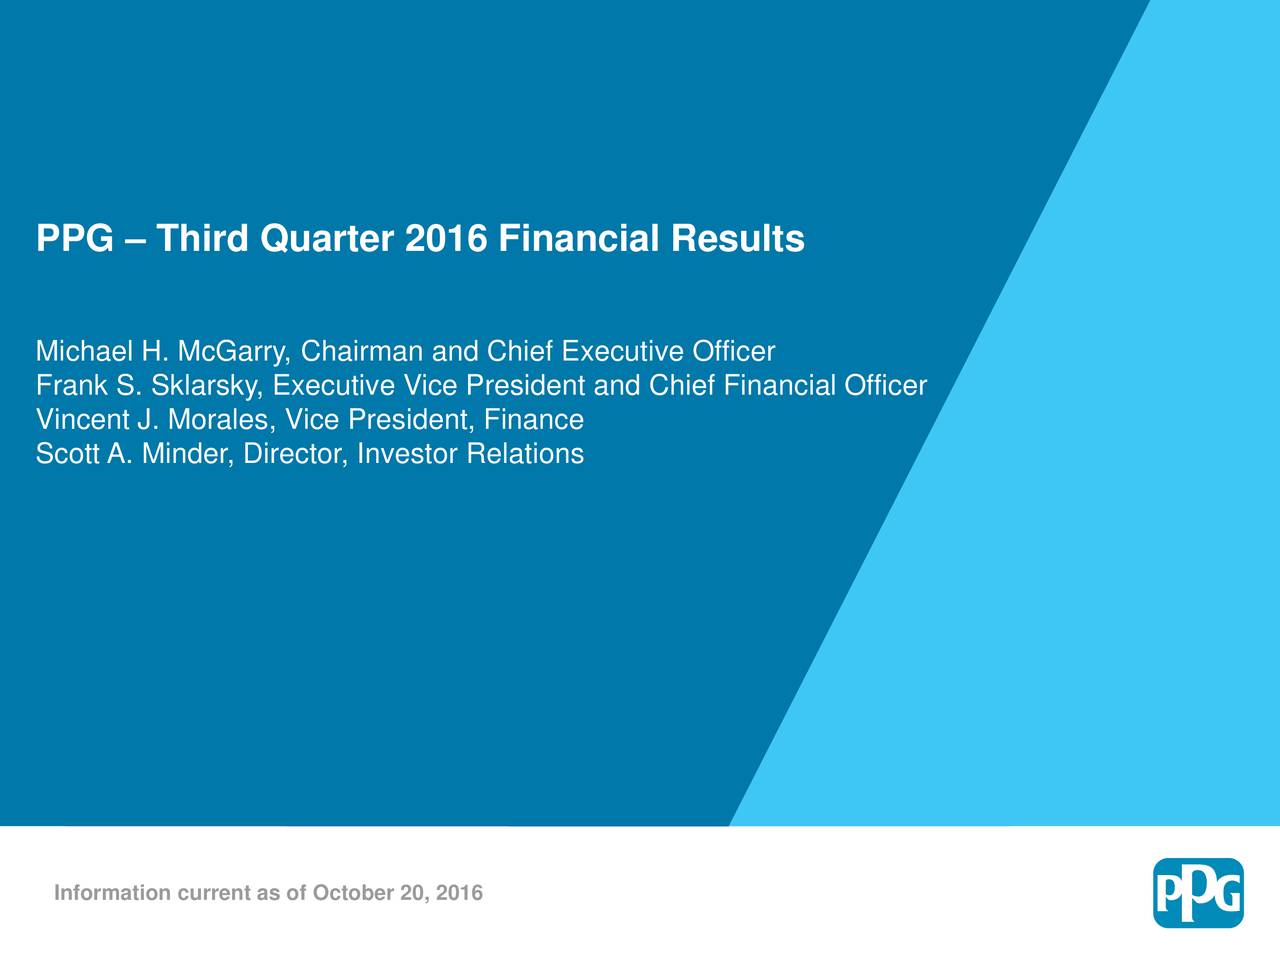 Michael H. McGarry, Chairman and Chief Executive Officer Frank S. Sklarsky, Executive Vice President and Chief Financial Officer Vincent J. Morales, Vice President, Finance Scott A. Minder, Director, Investor Relations Information current as of October 20, 2016